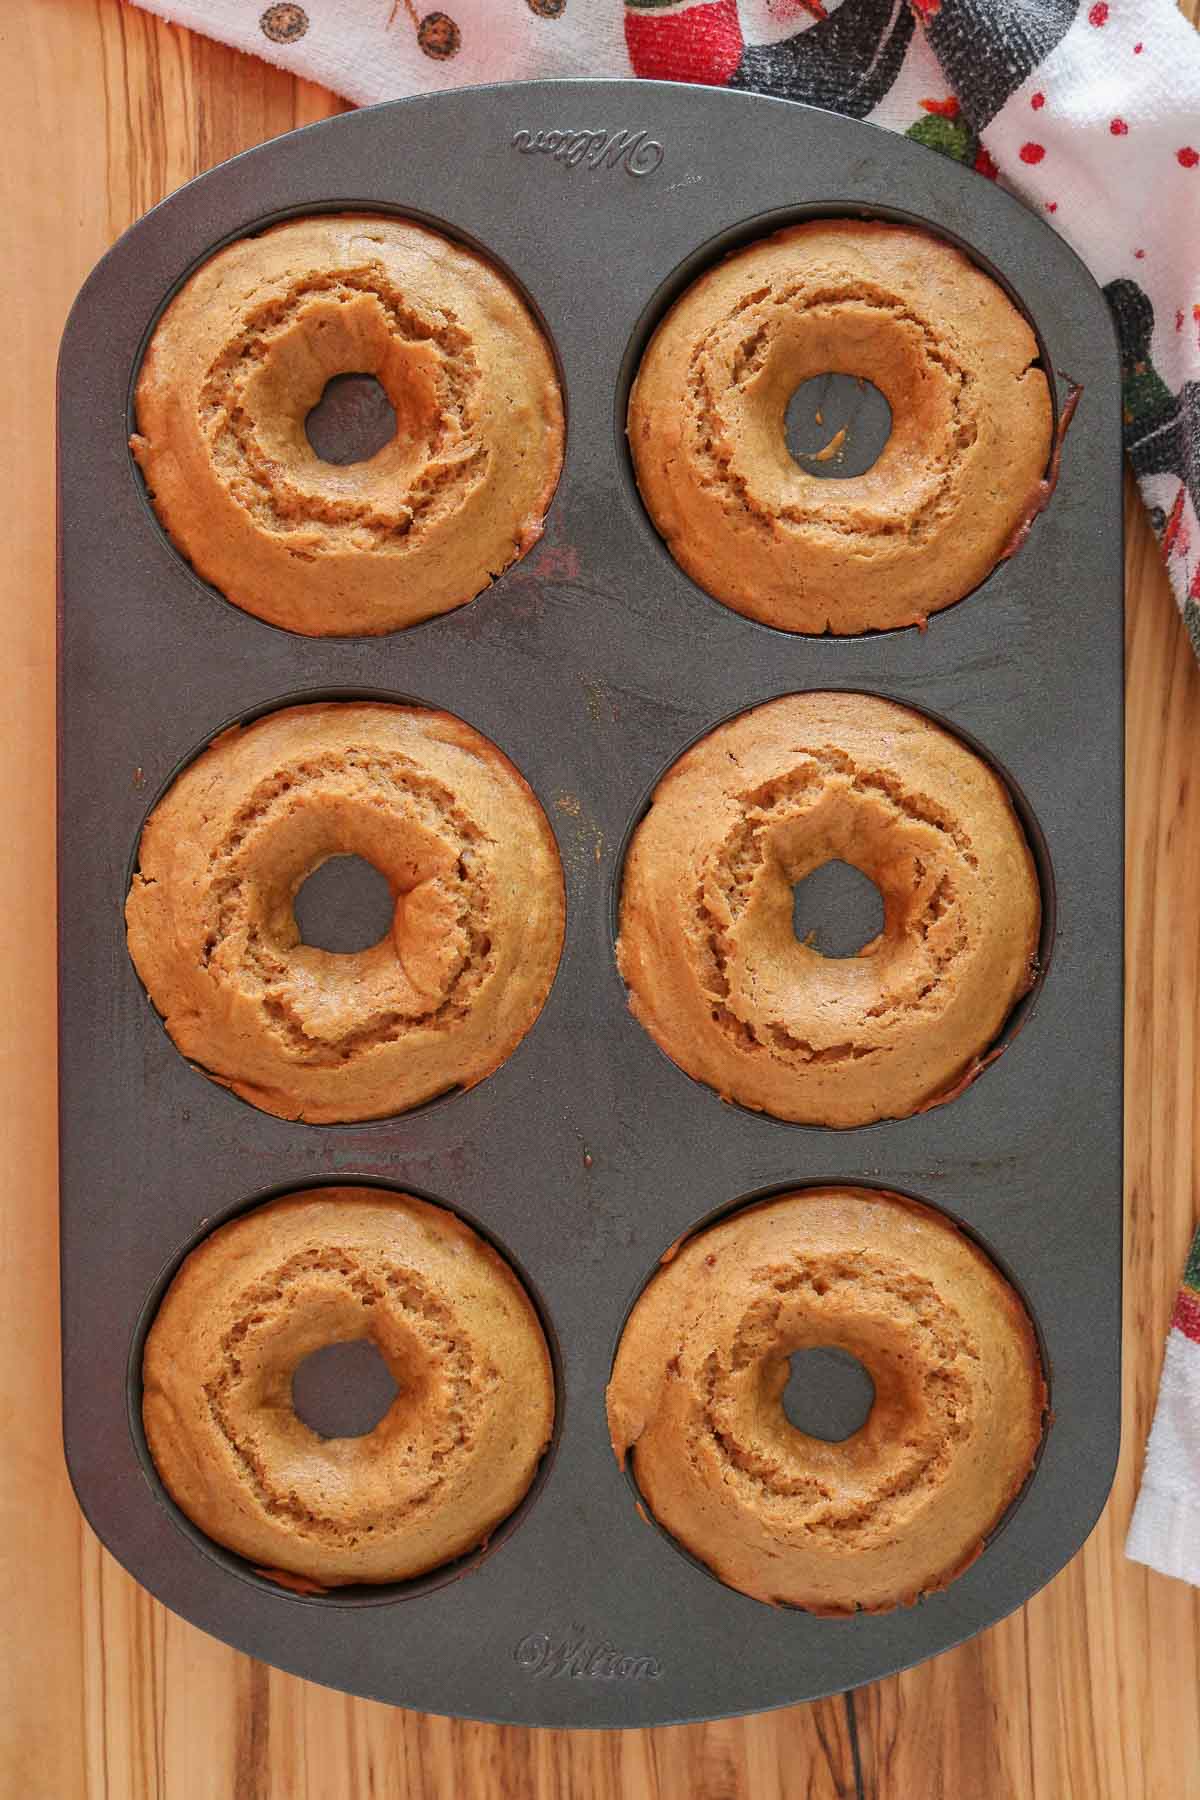 Donuts in a donut pan after being baked.